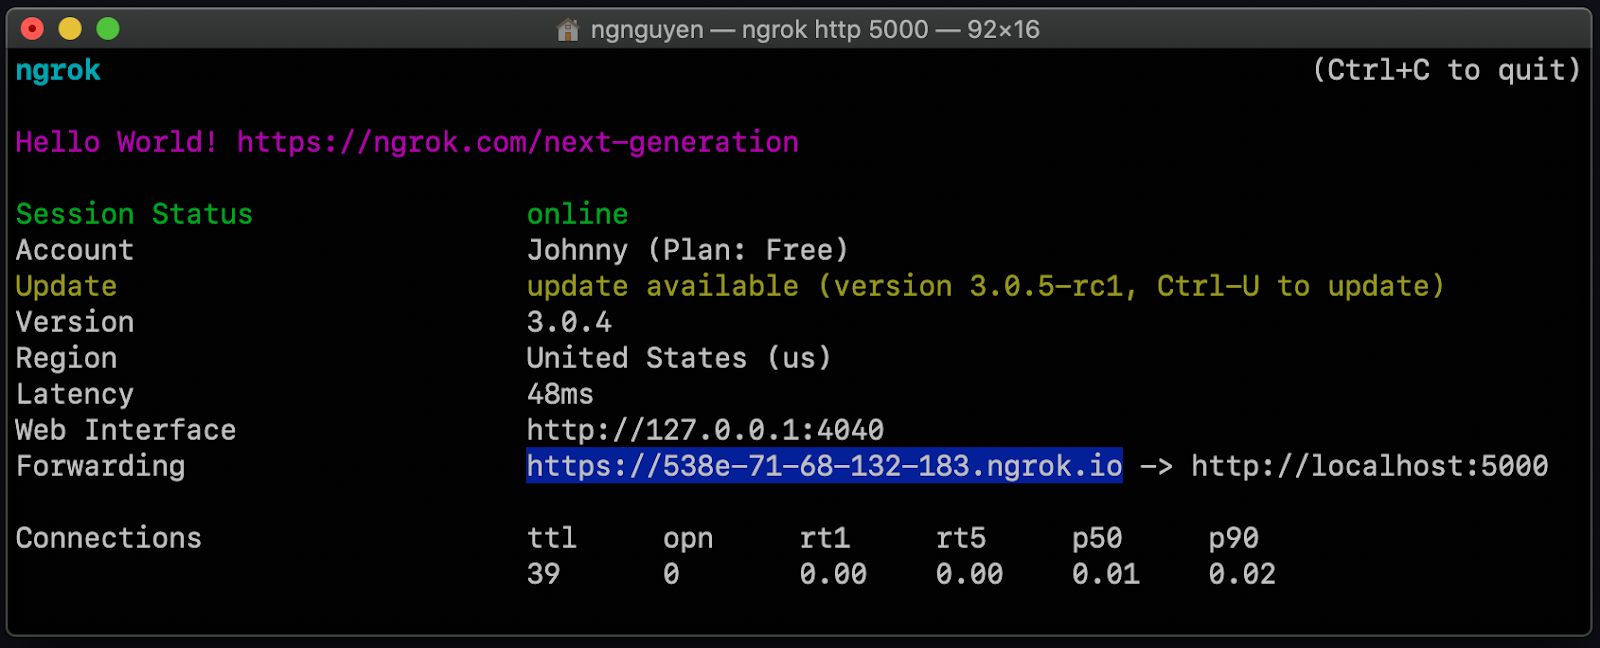 Running ngrok in the command prompt, a list of session statuses is displayed, including a forwarding URL.